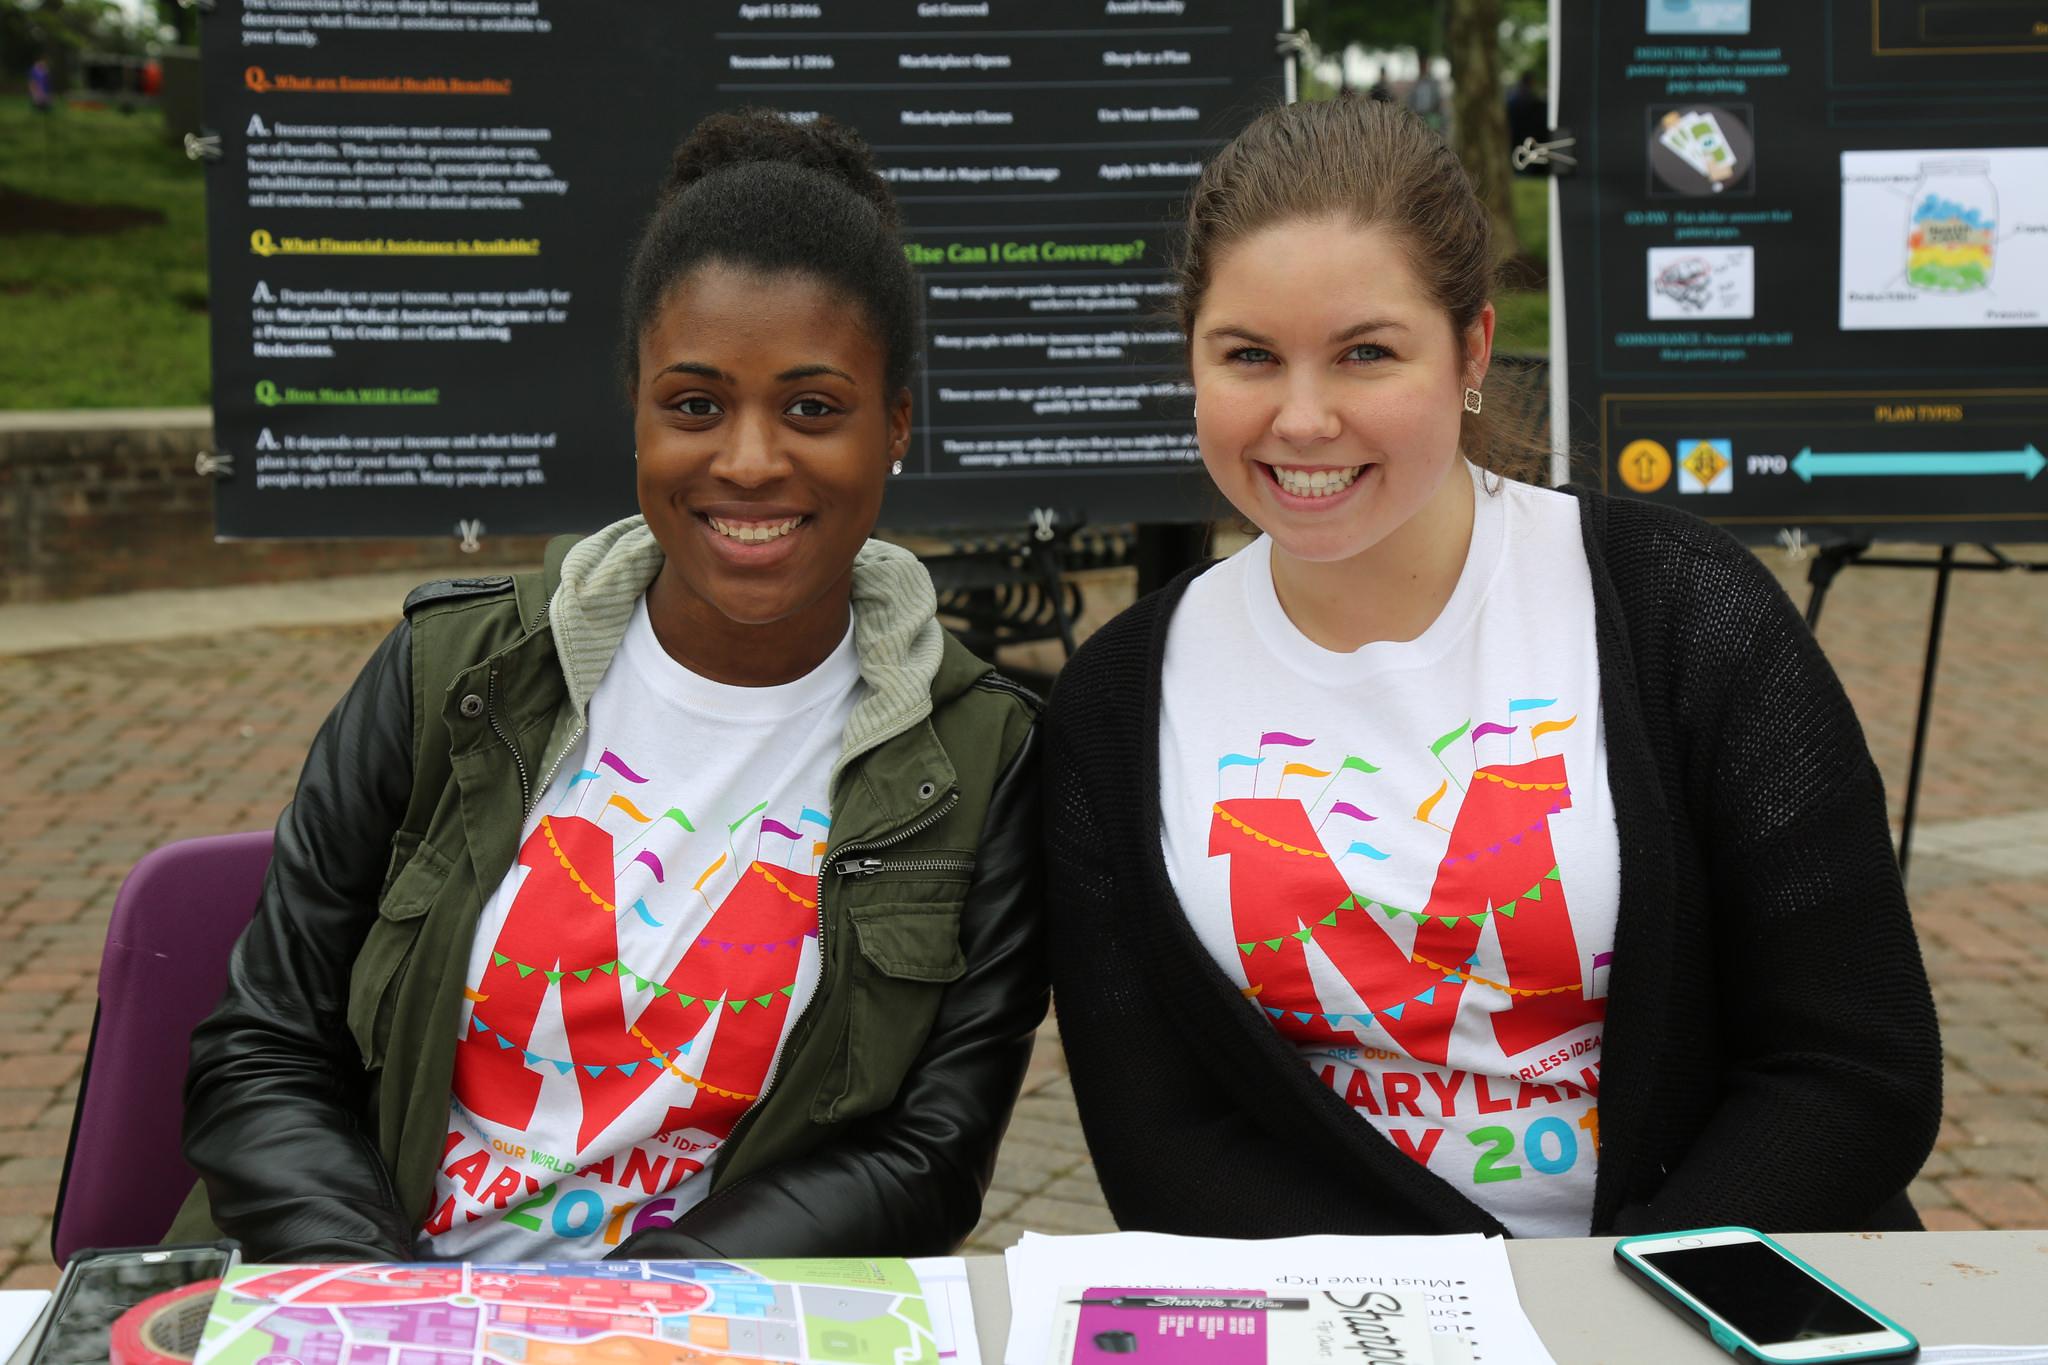 Health Policy and Management Student Association Volunteers at the University of Maryland